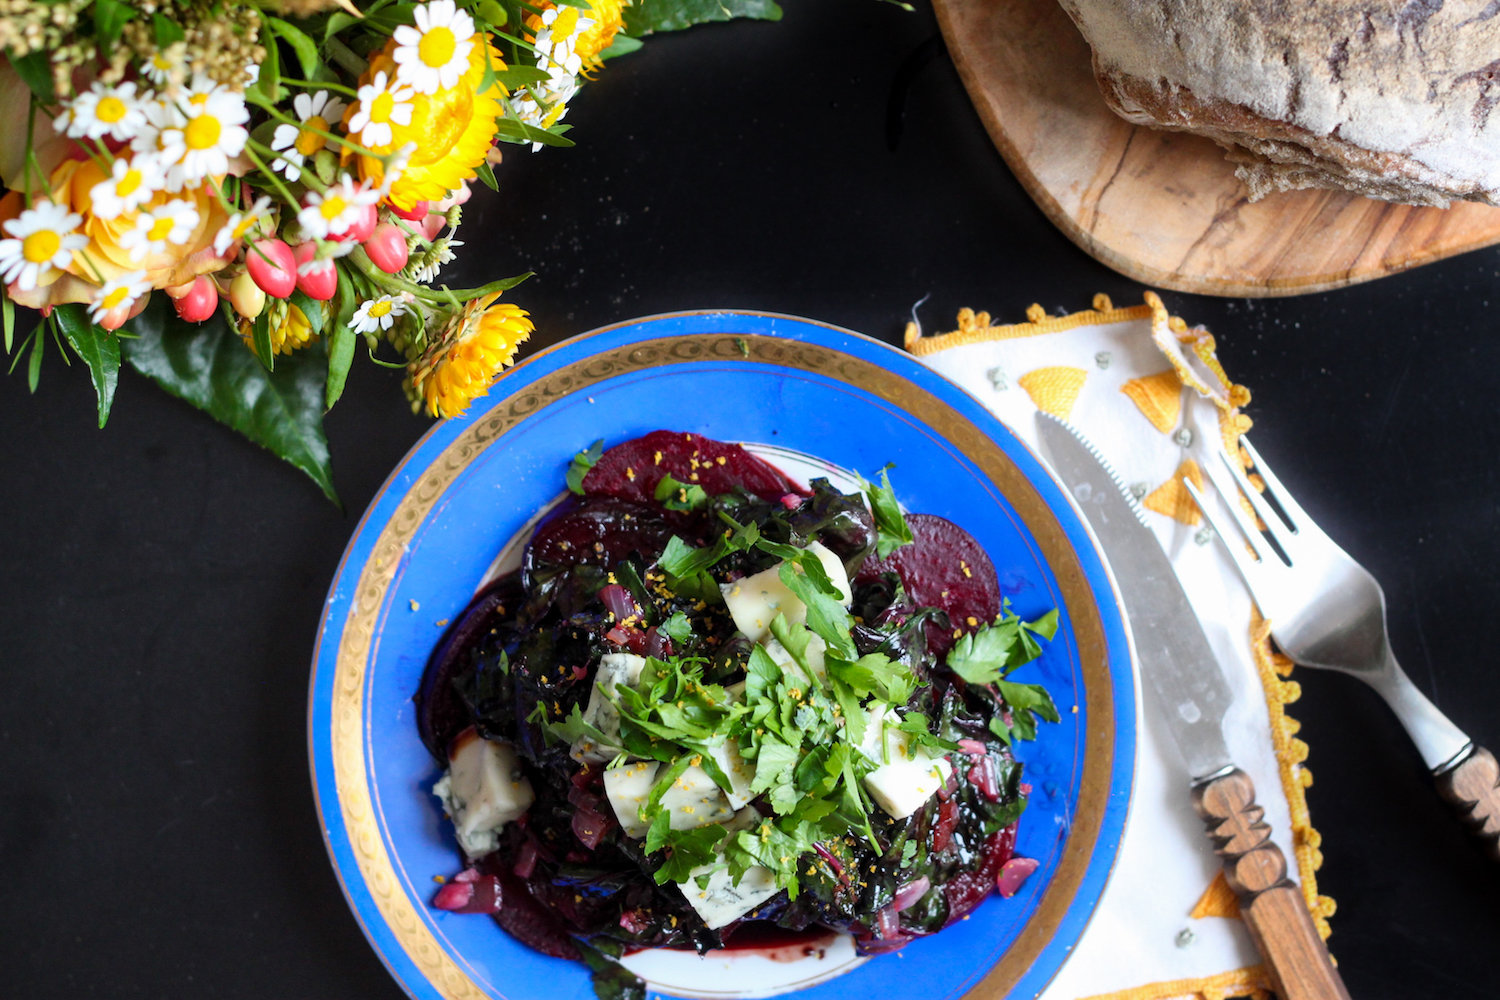 Beet salad with greens, garlic, and gorgonzola (Eat Me. Drink Me.)